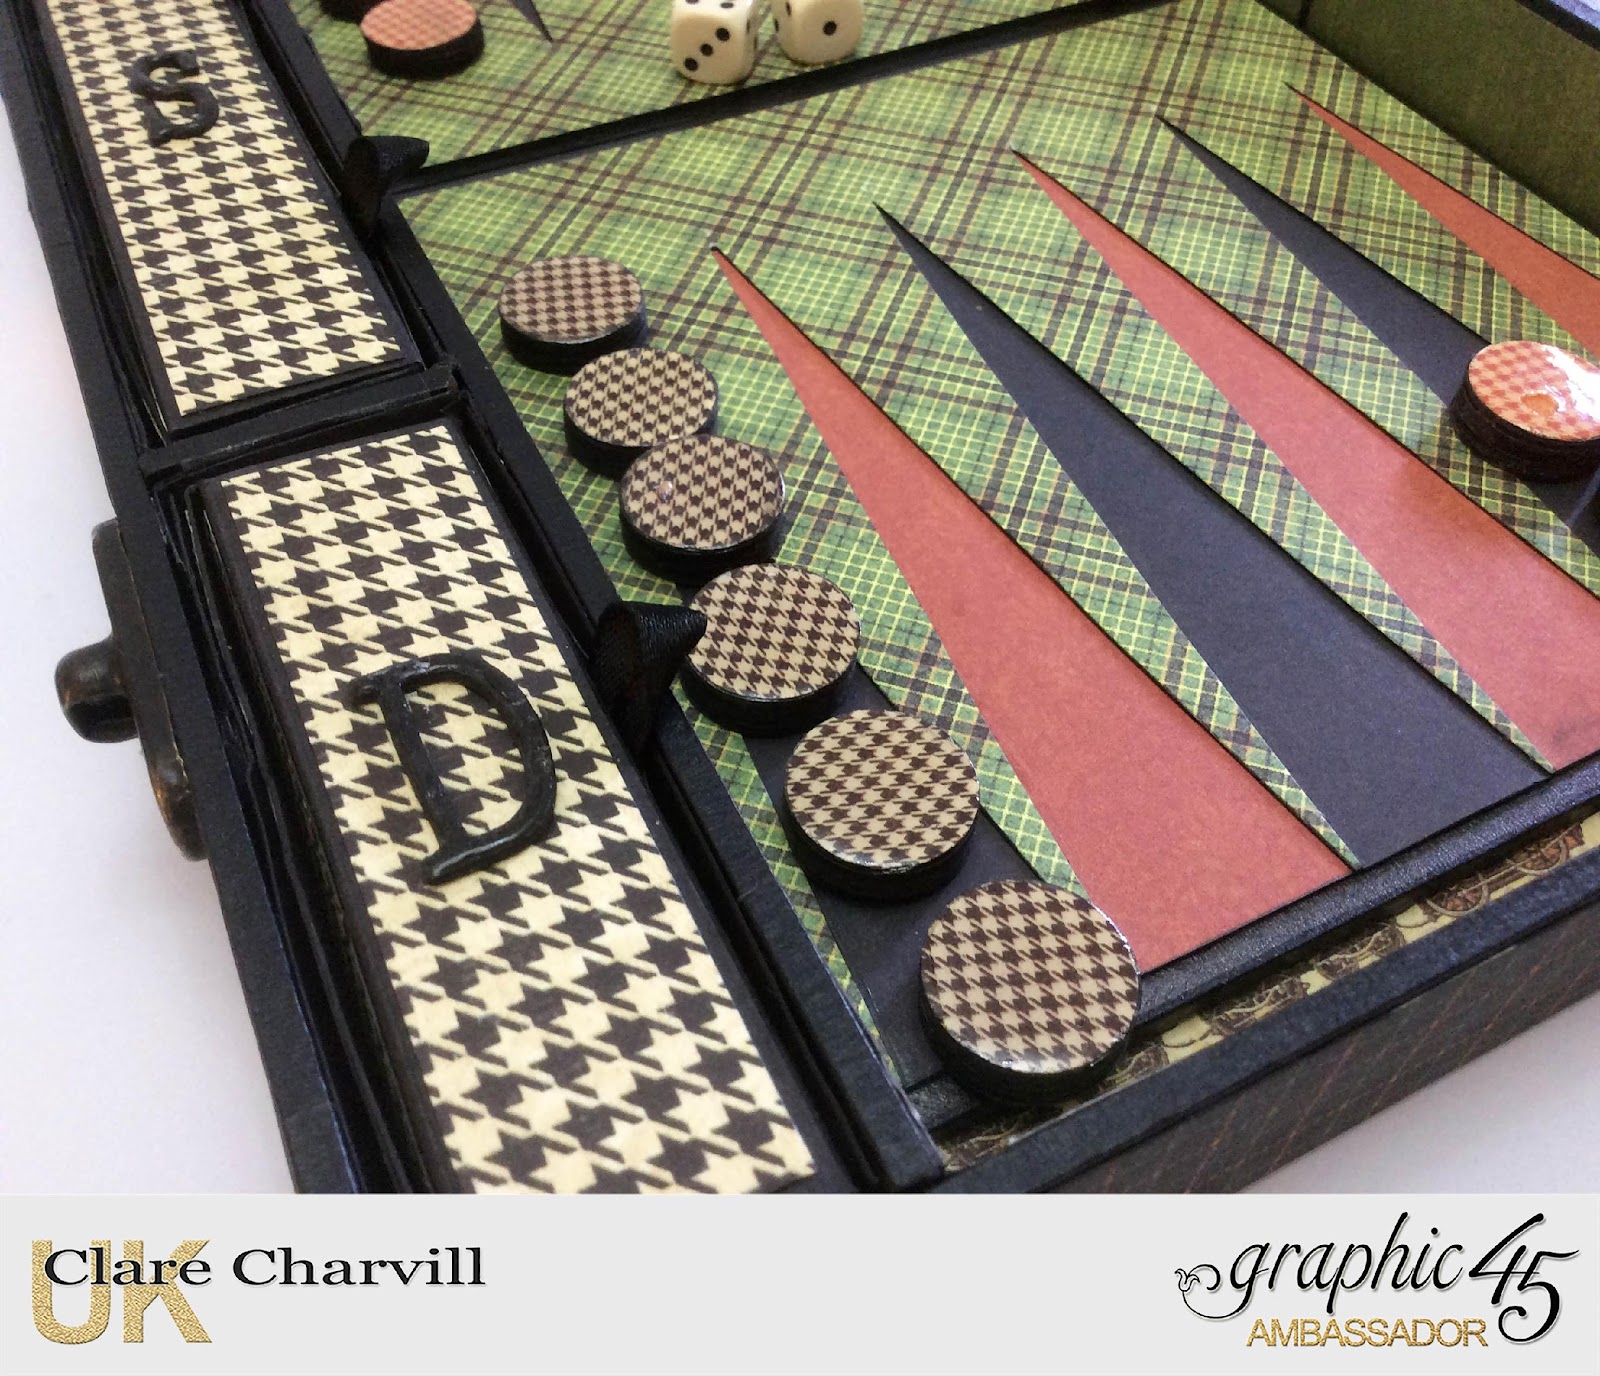 /Users/clare/Pictures/Photos Library.photoslibrary/Masters/2017/07/10/20170710-063017/MDCOG Backgammon 1 Clare Charvill Graphic 45.jpg